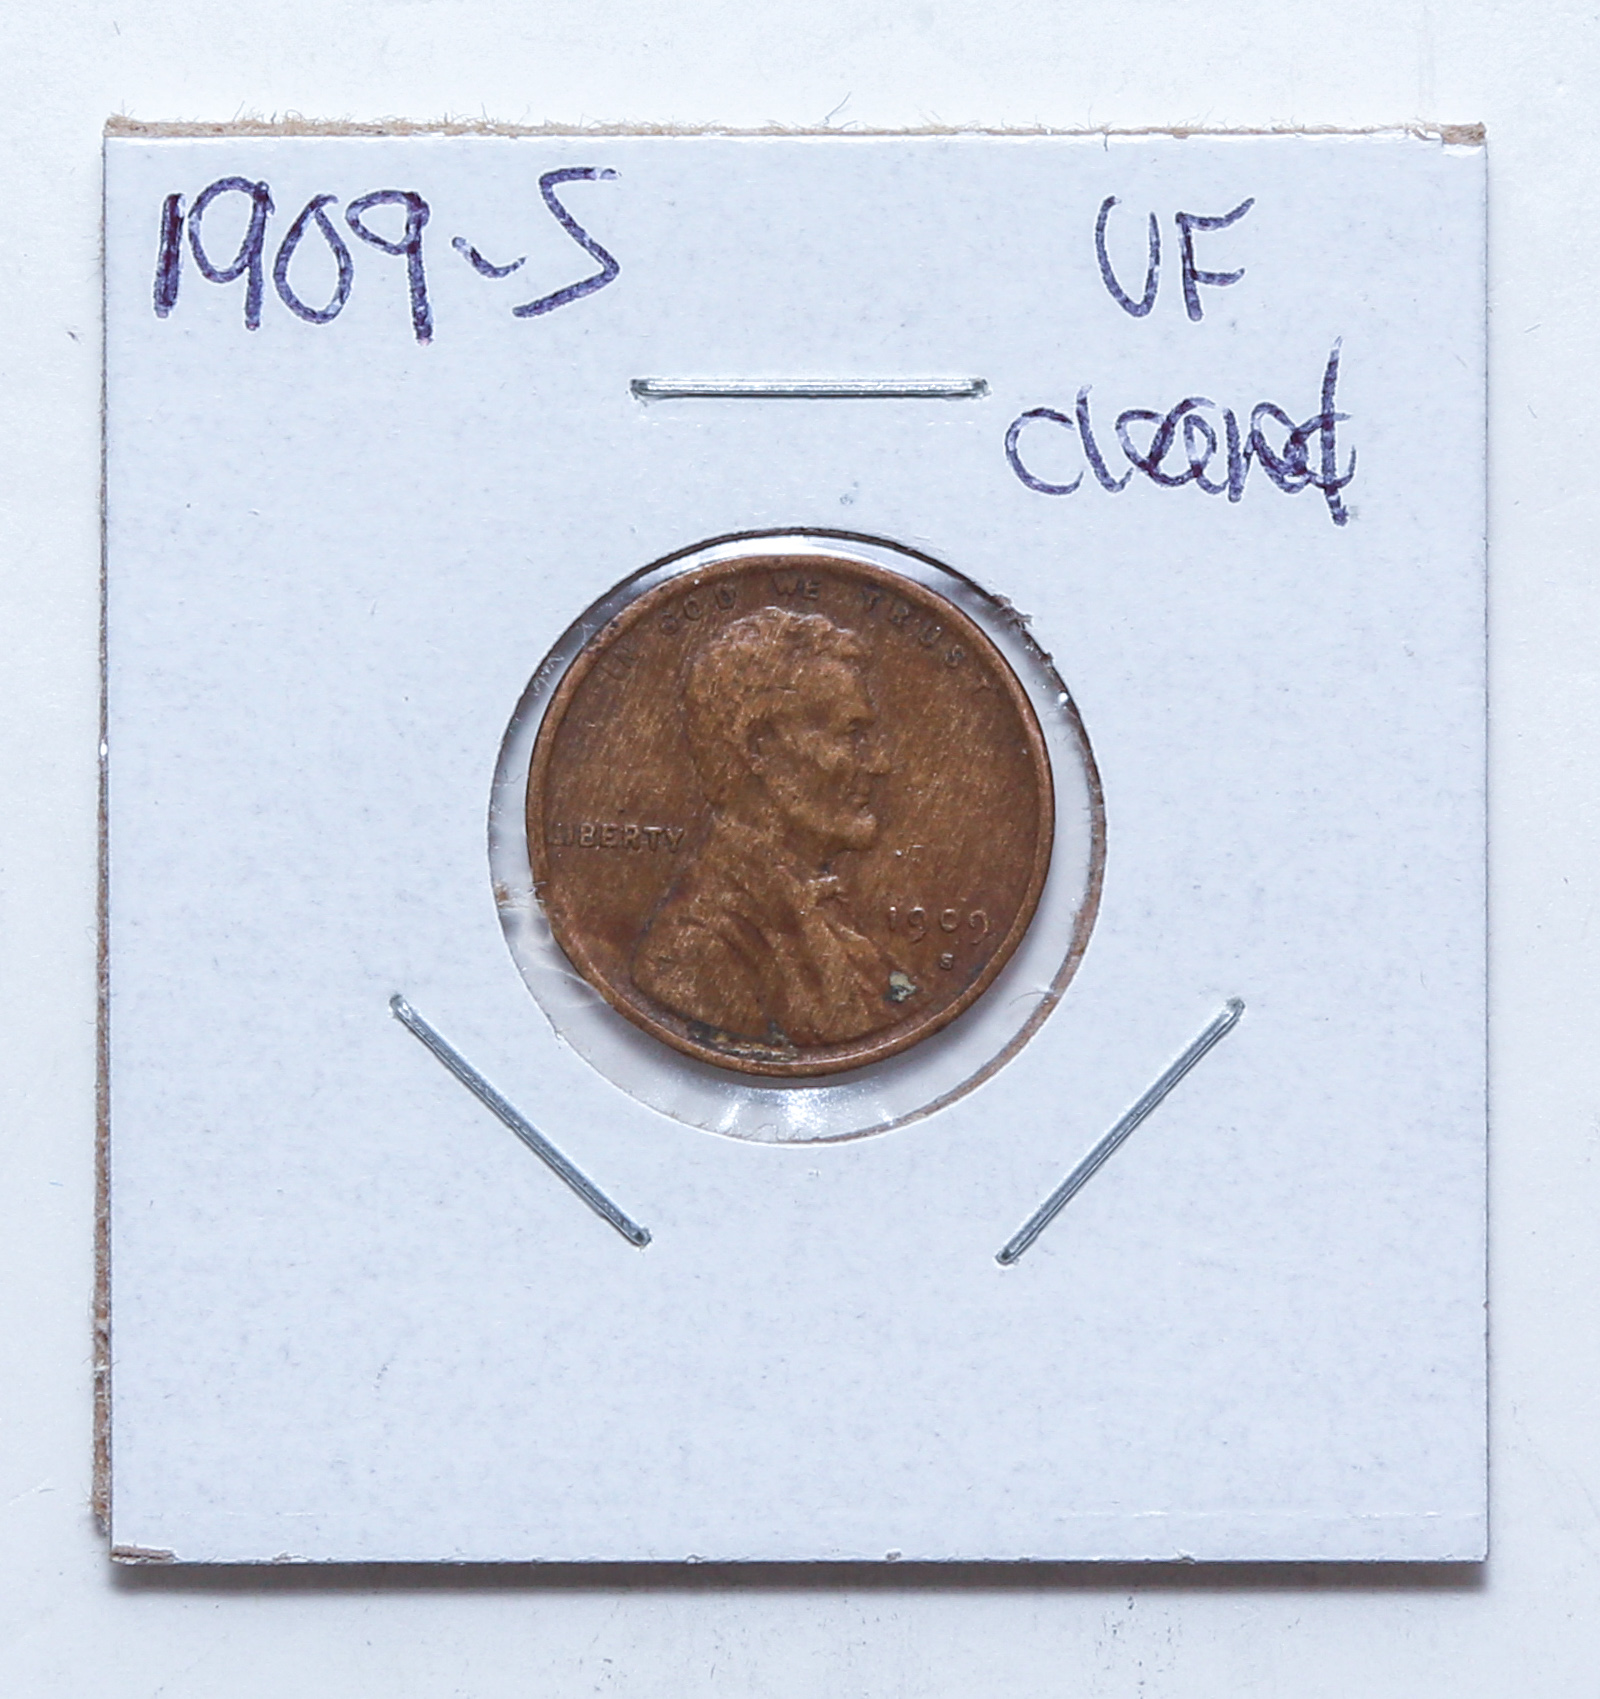 1909-S LINCOLN CENT VF CLEANED